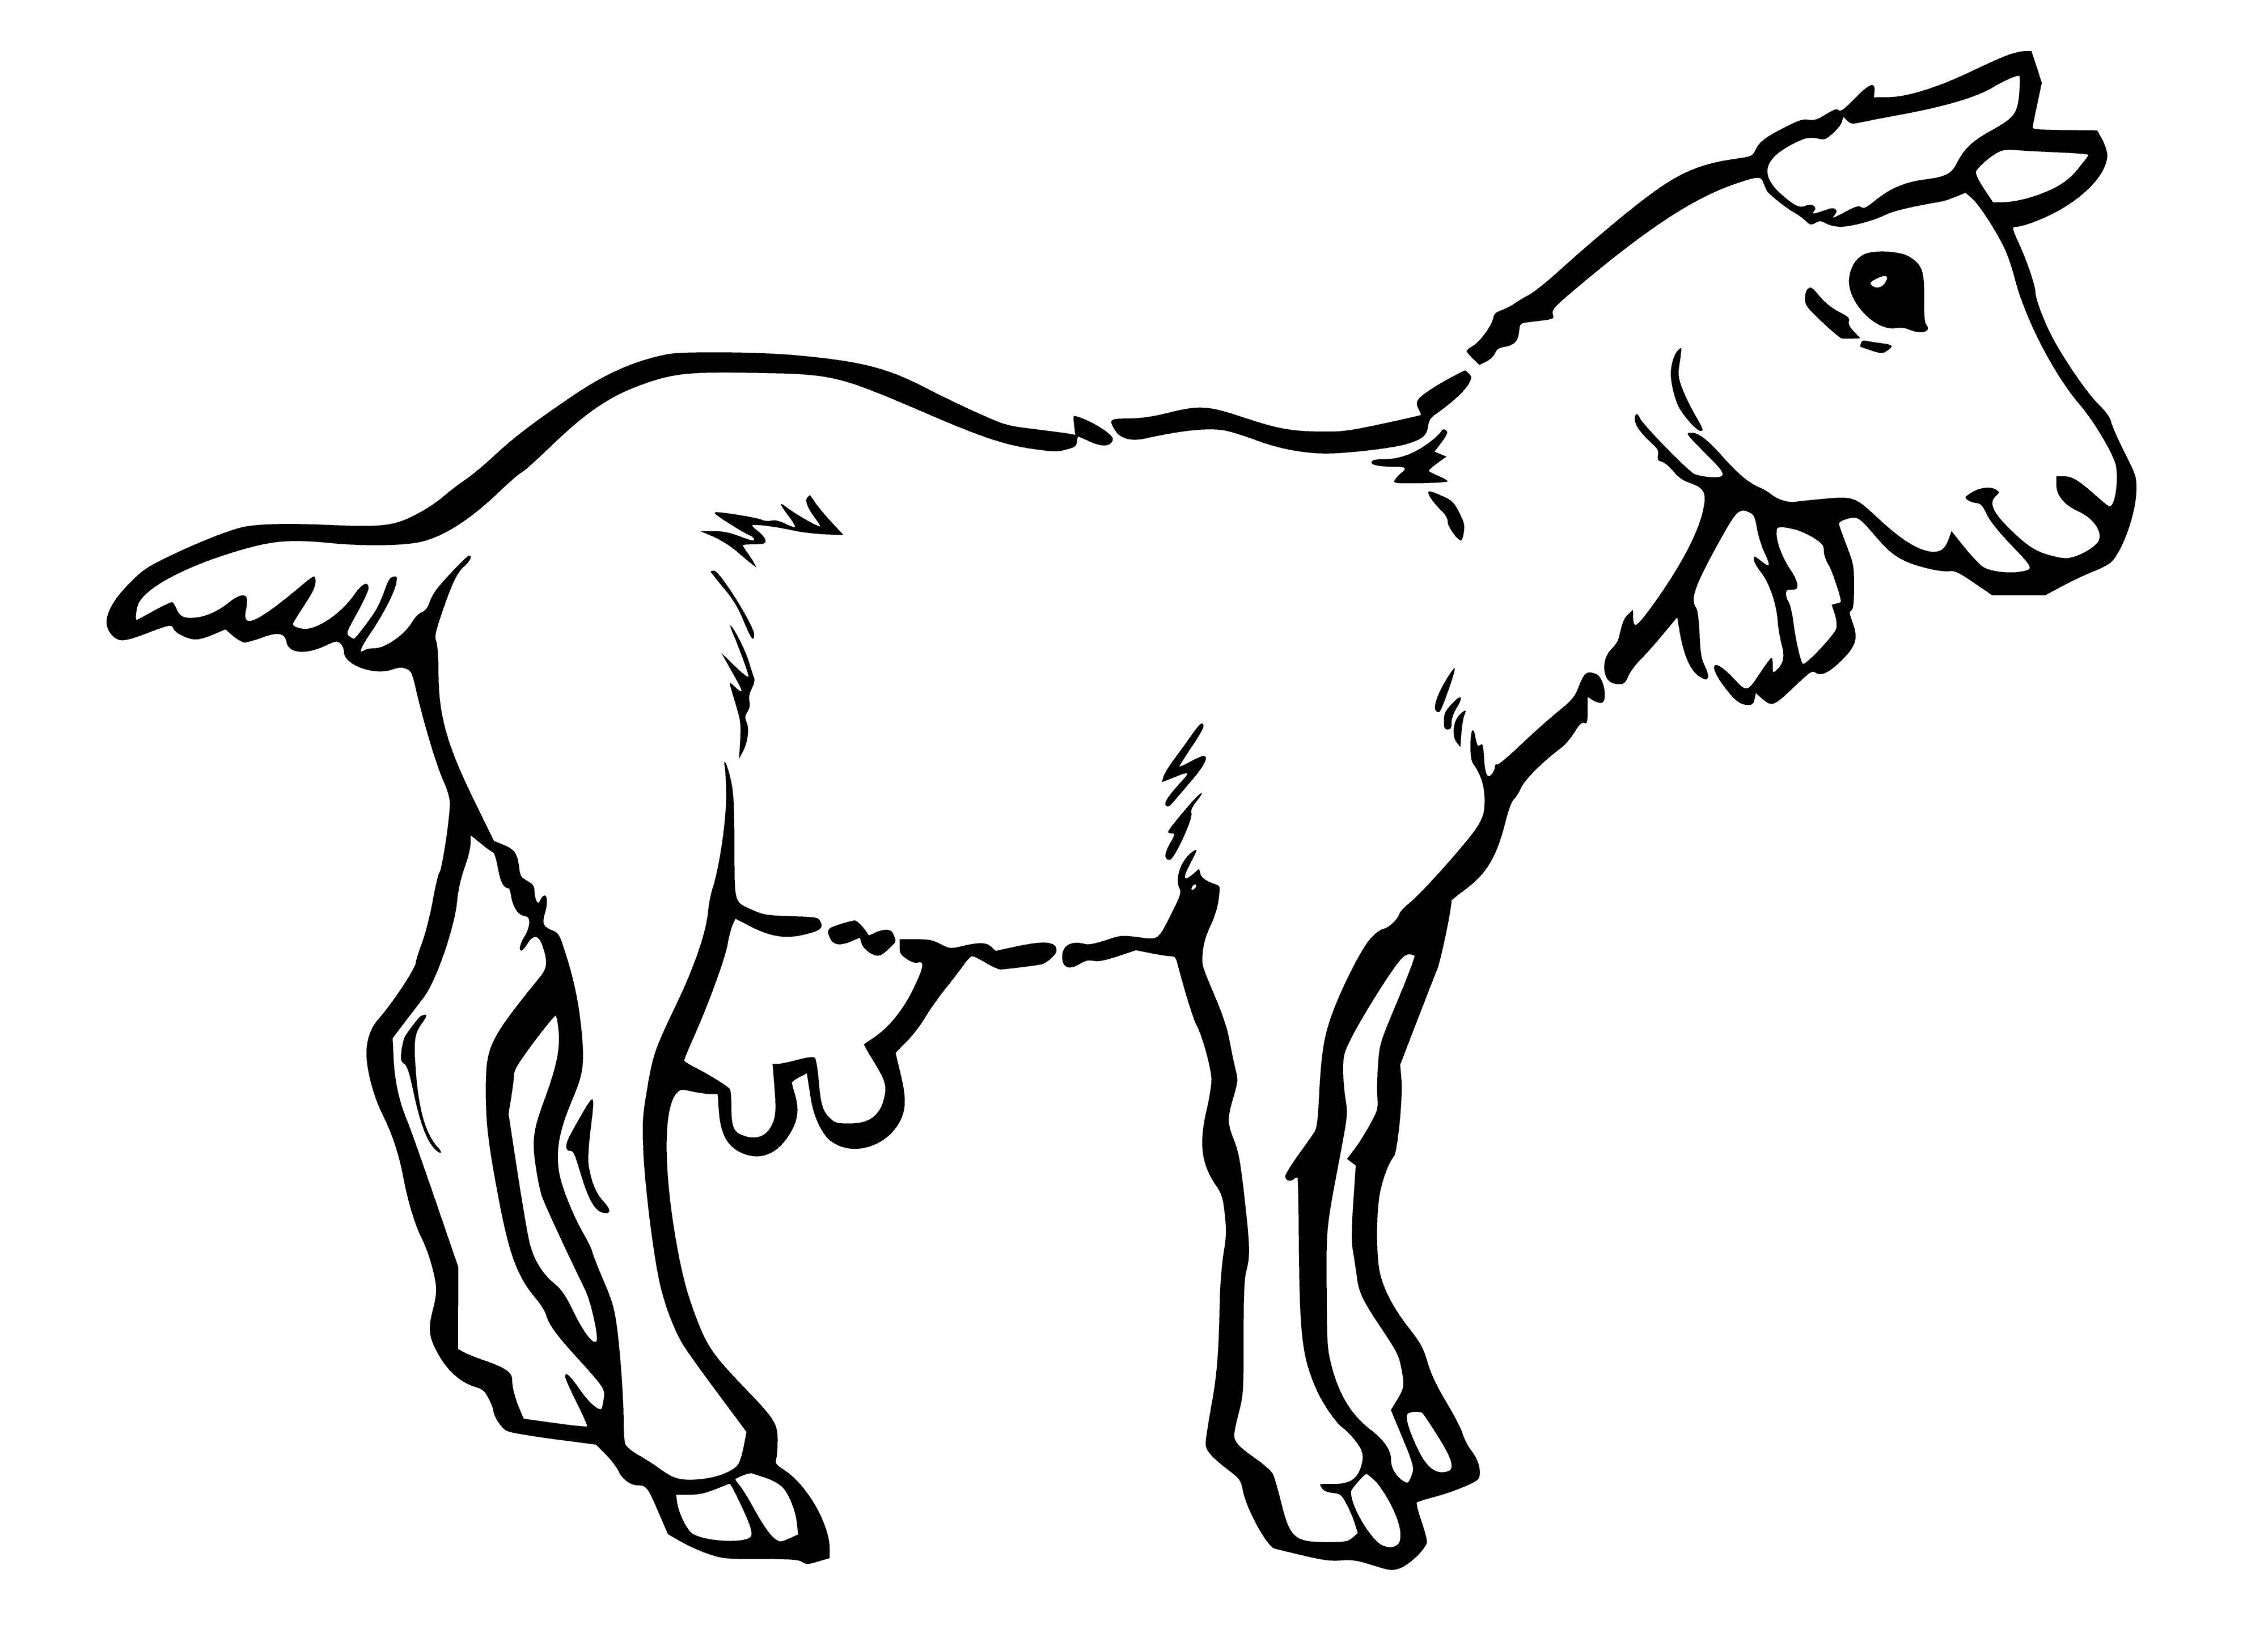 coloring page: Goat is a four-legged mammal with fur, two small horns, black eyes & nose. Stands on a mountain with mouth open & tongue out.